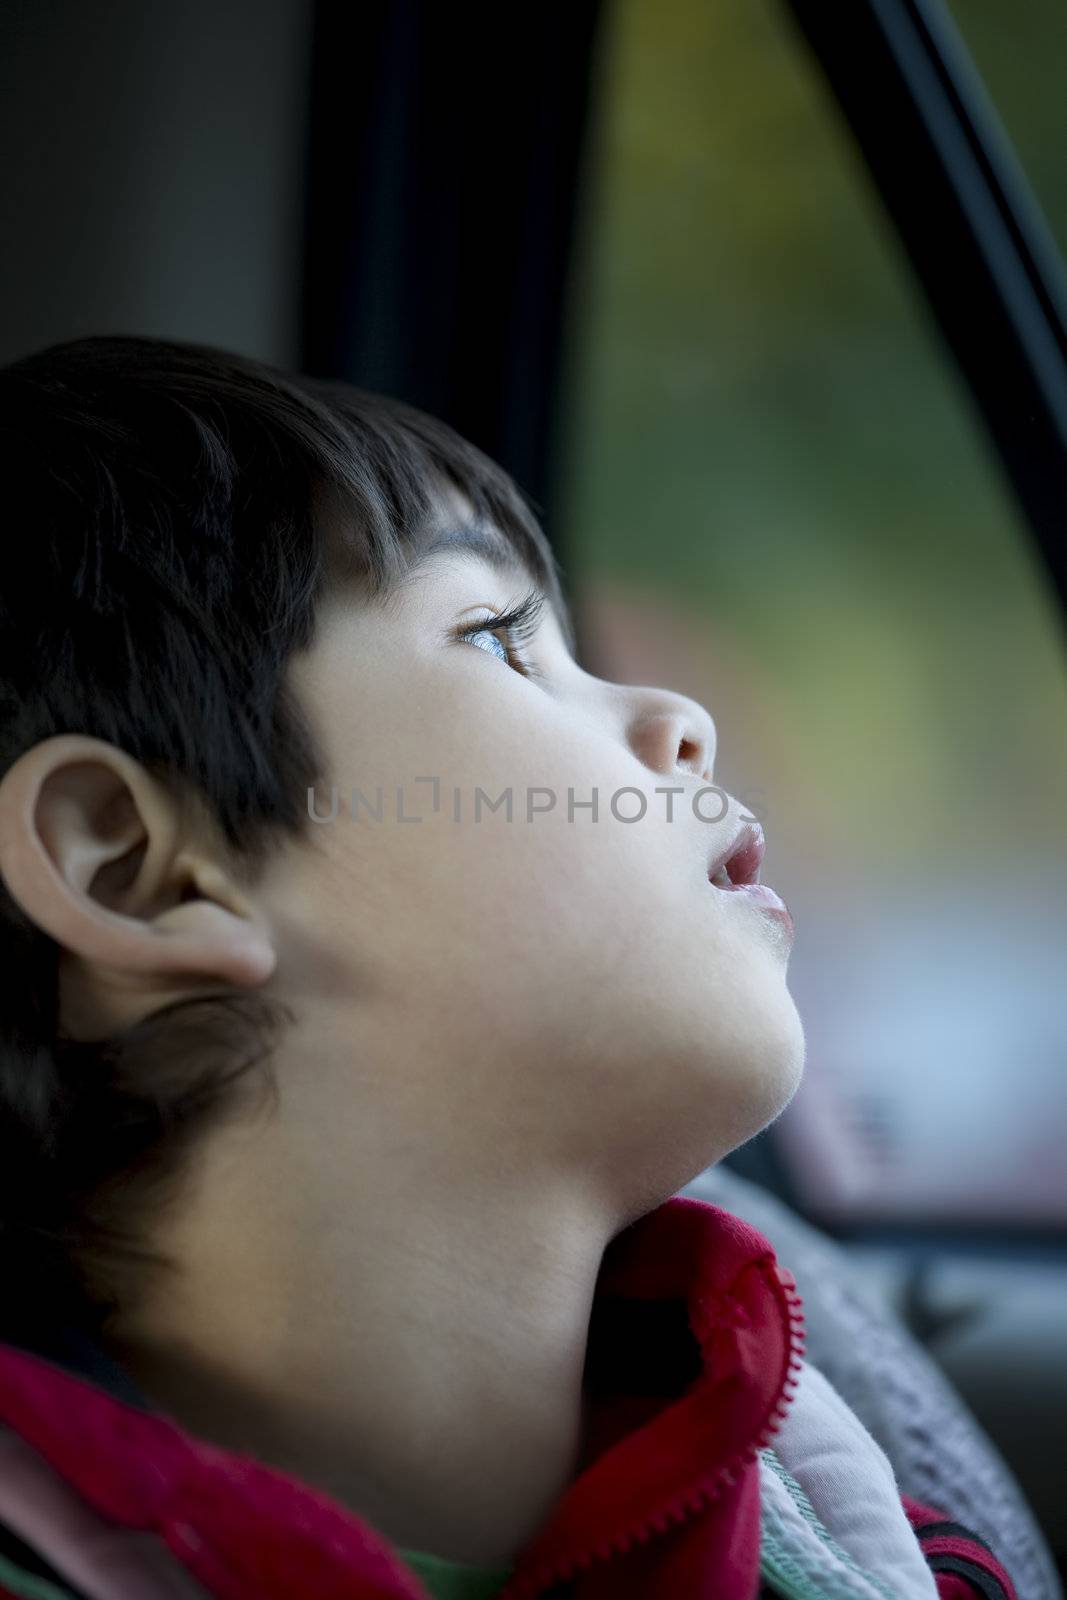 Handsome four year old boy looking quietly out car window